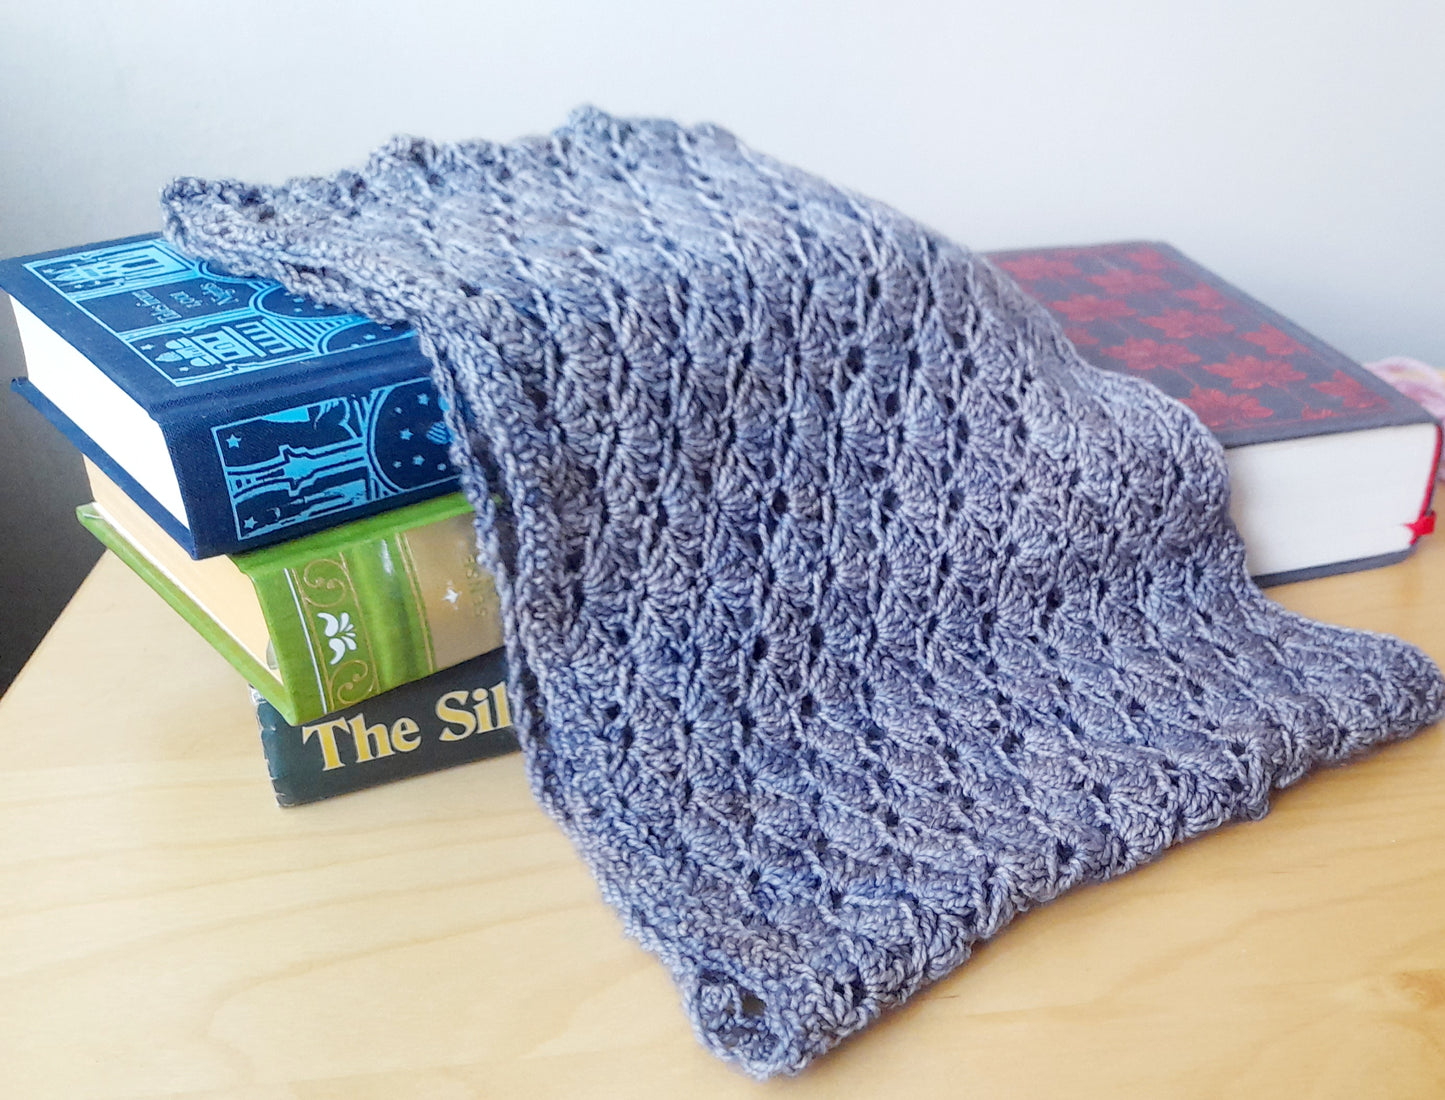 The wave cowl finished piece draped across some books. 